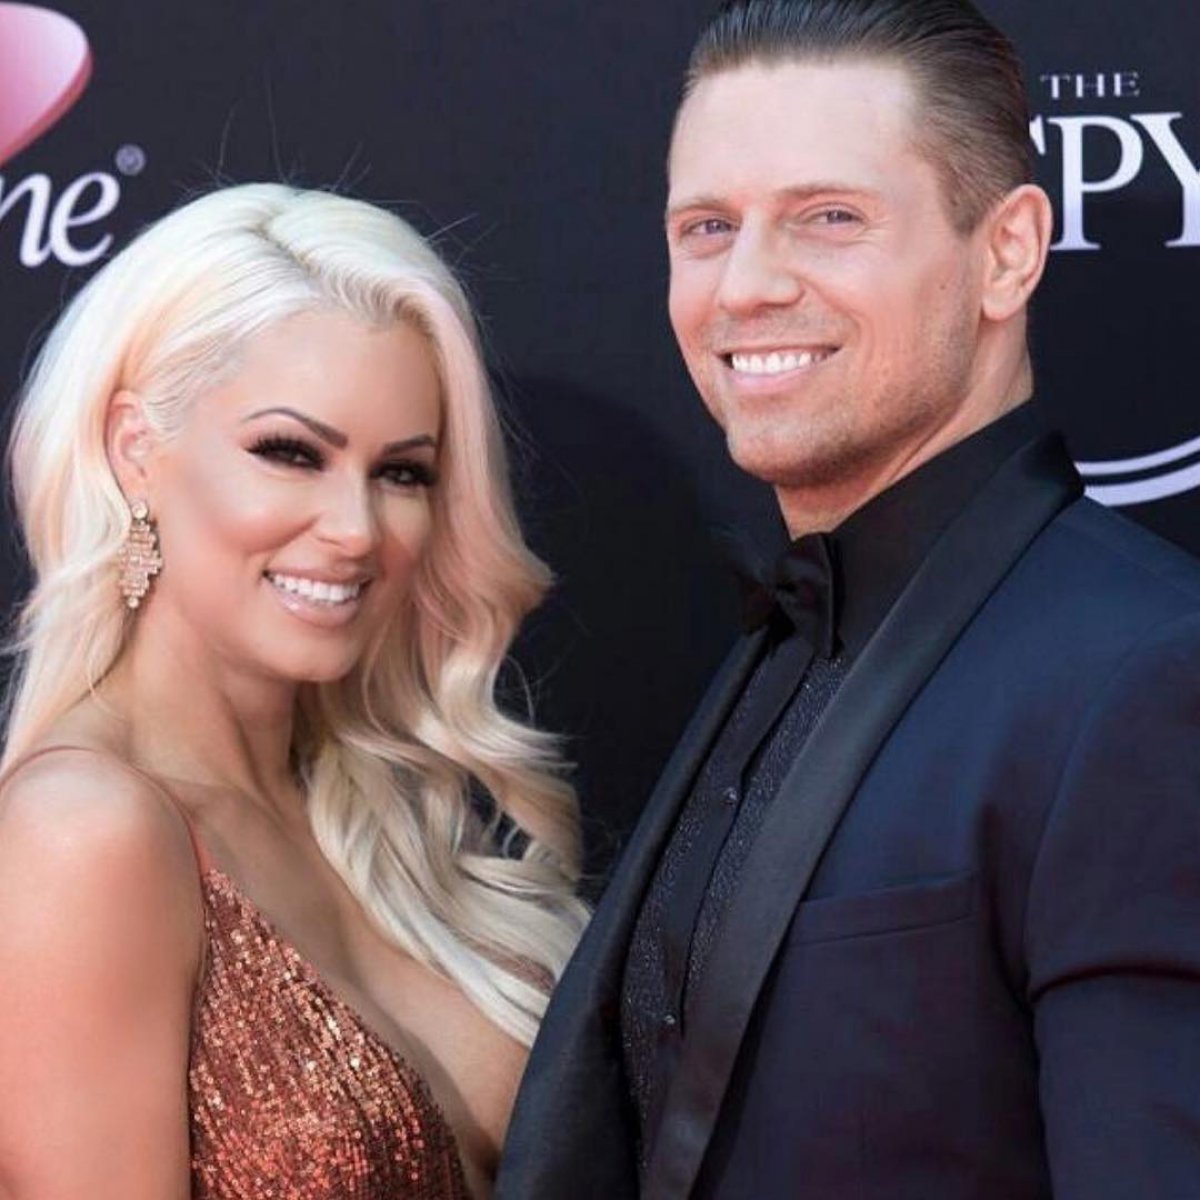 The Miz and fellow WWE star Maryse expecting their first child - Reality TV World1200 x 1200